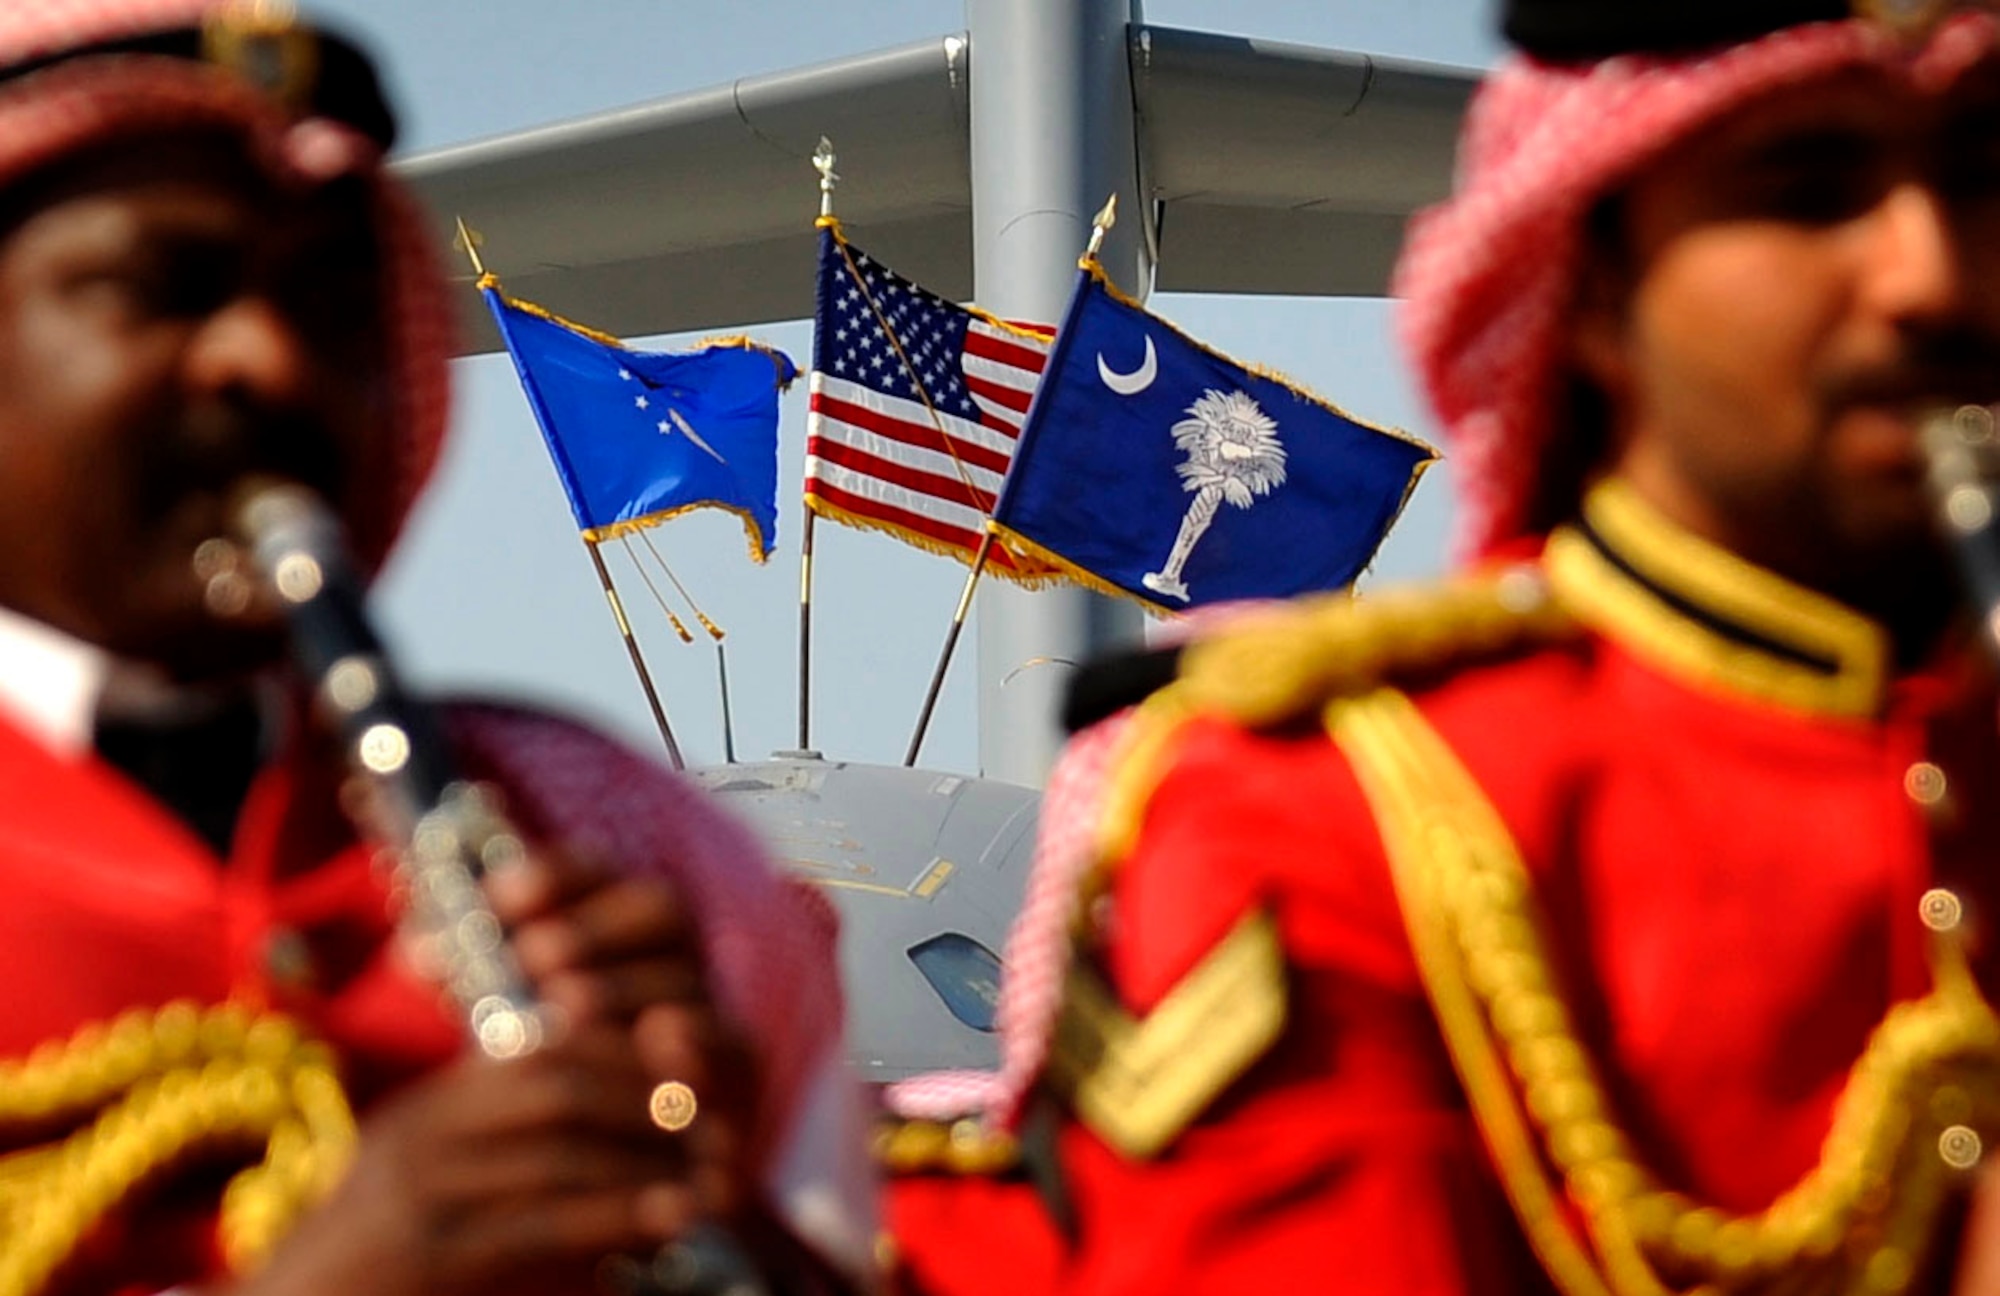 The U.S. flag, along with the Air Force and South Carolina state flag fly in the breeze while a Bahraini military band plays Jan. 21, 2010, at the Bahrain International Airshow.  (U.S. Air Force photo/ SSgt Angelita Lawrence/released)